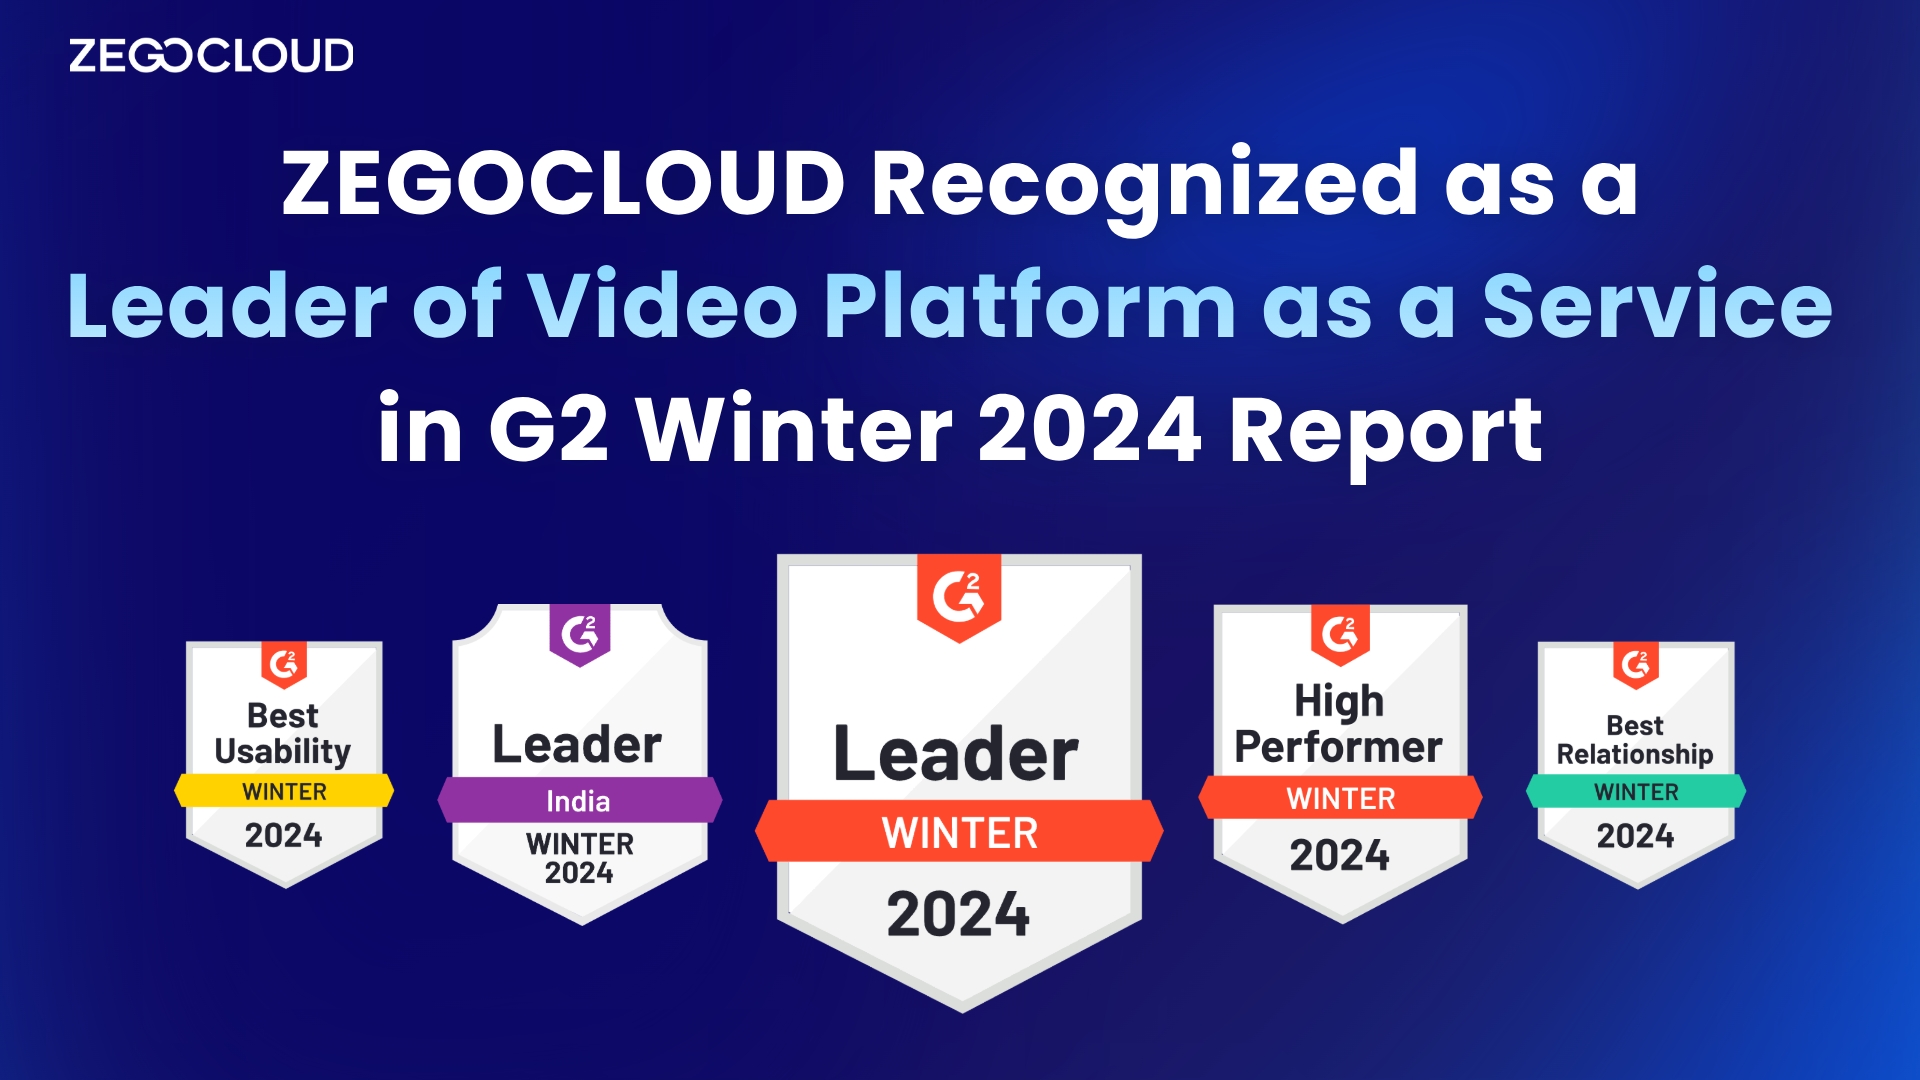 ZEGOCLOUD: a Leader in VPaaS with 19 G2 Badges